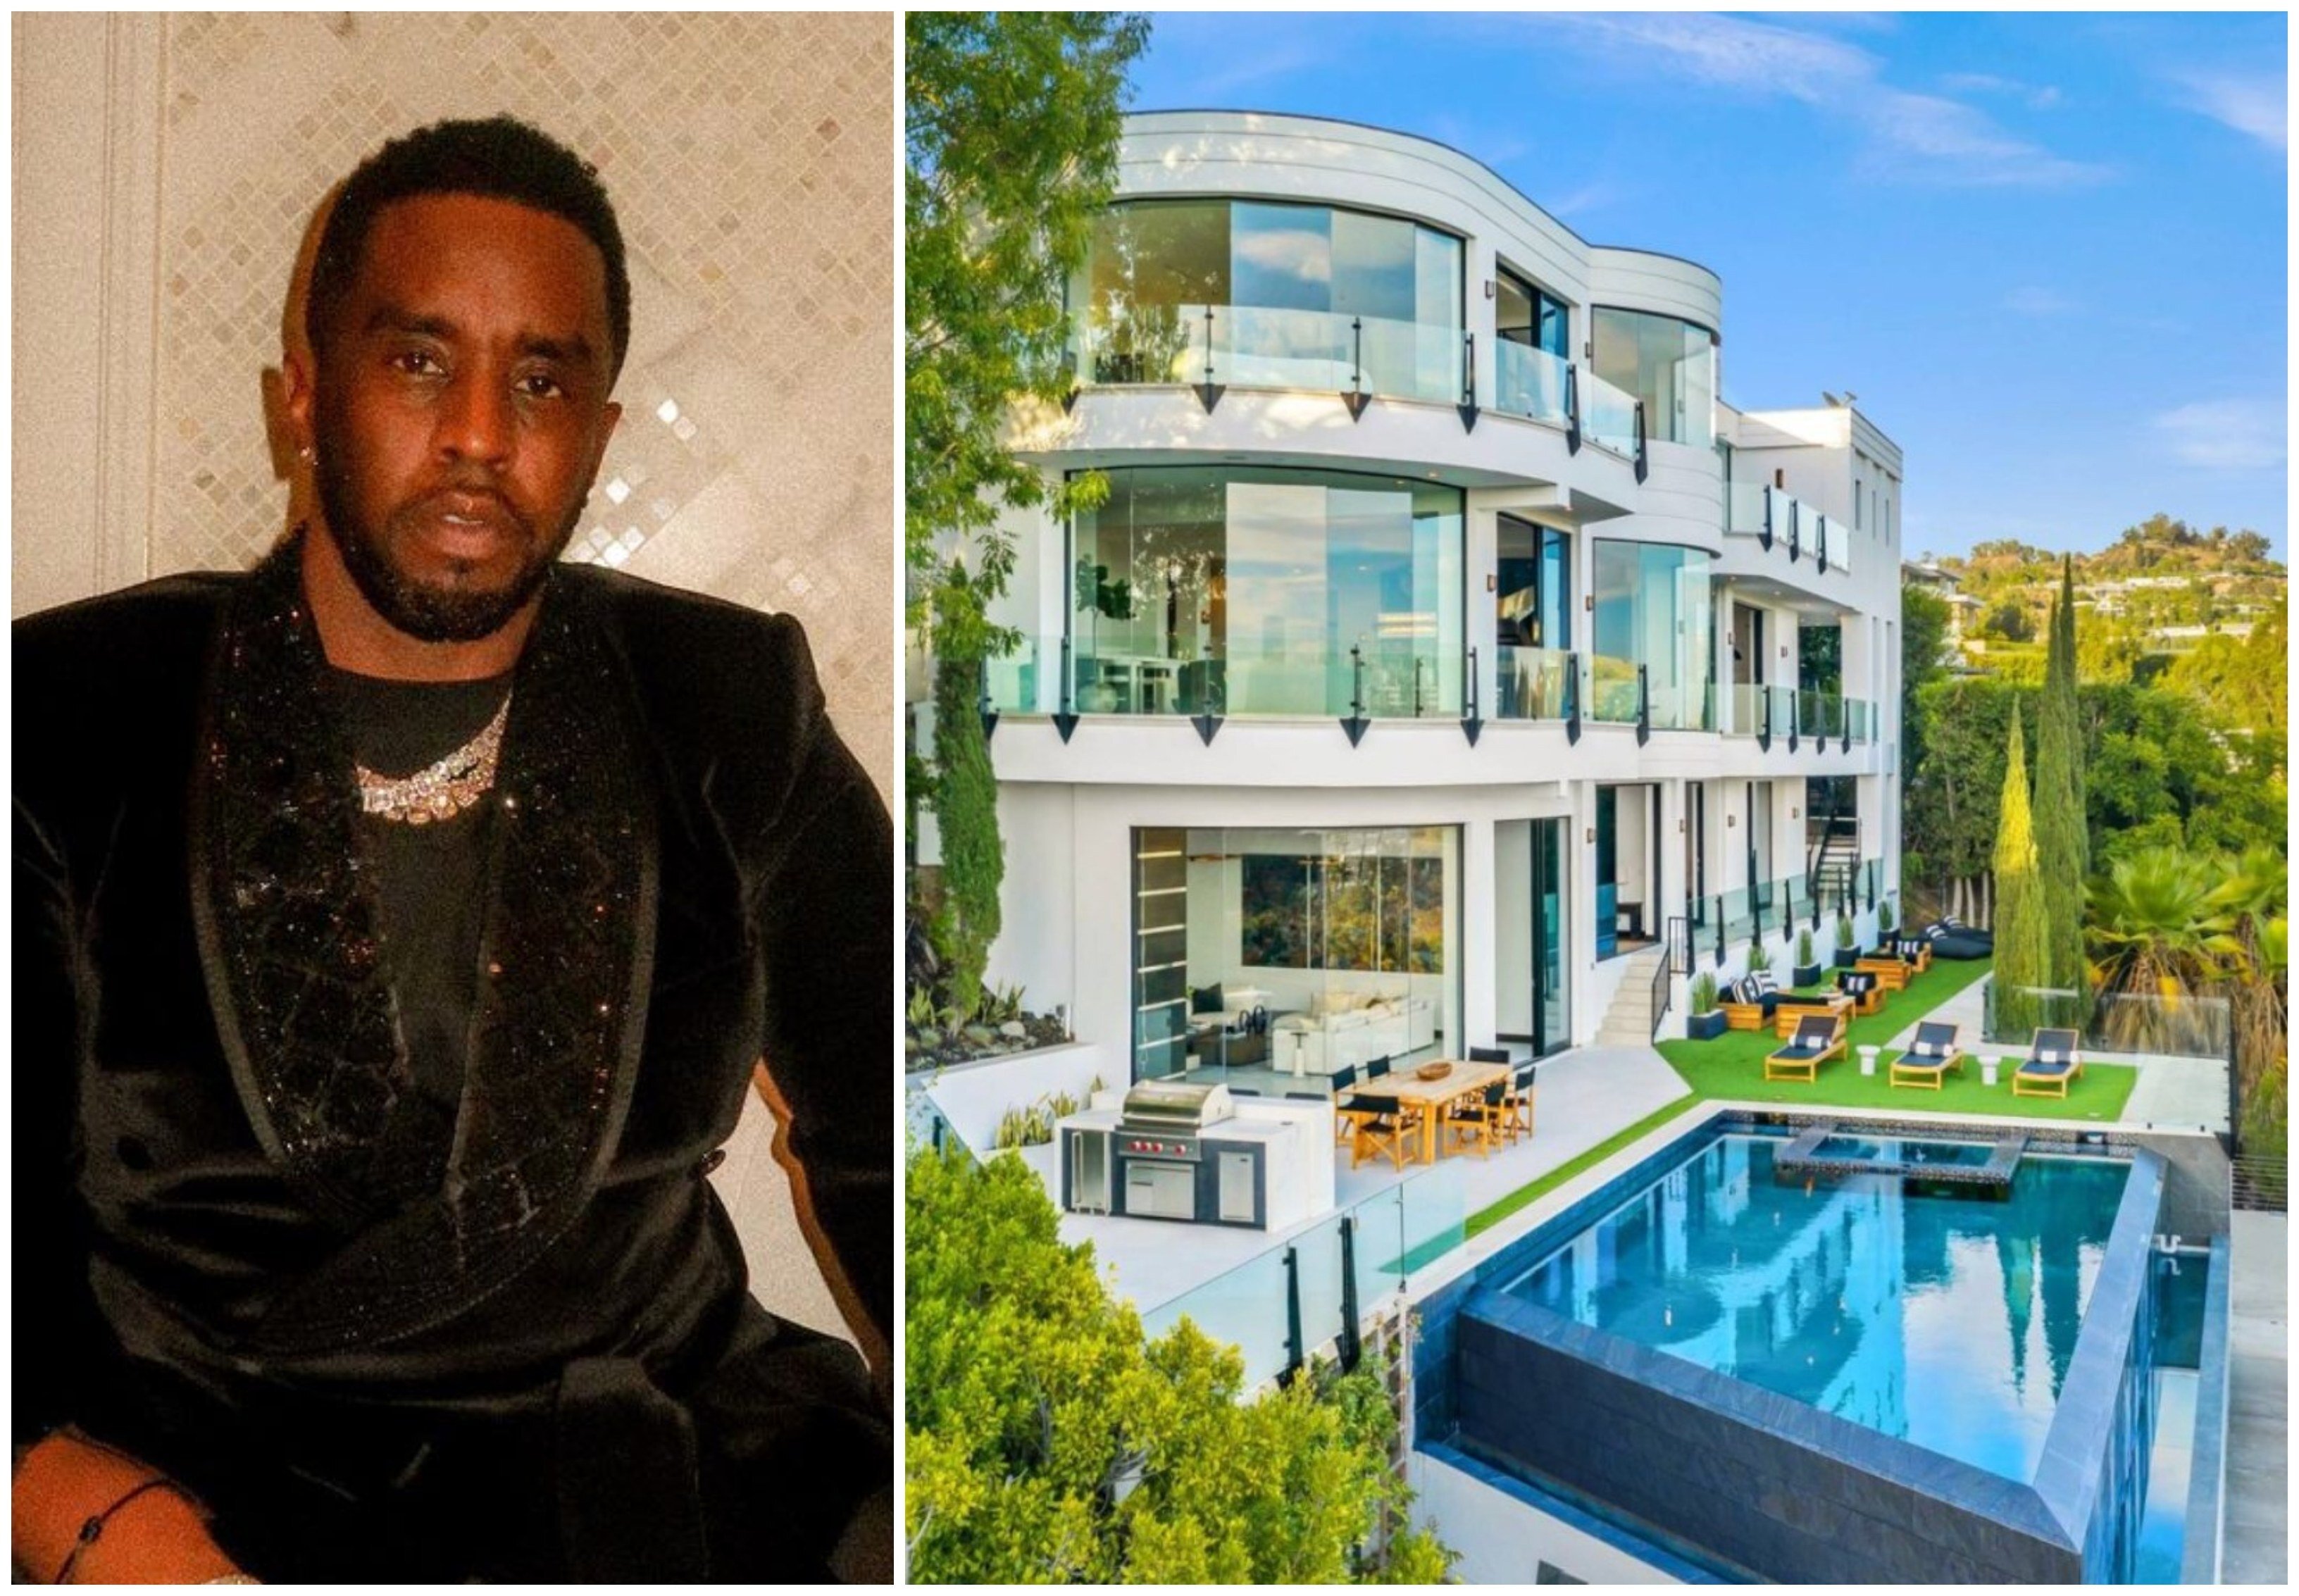 P. Diddy’s mansion in Los Angeles’ Beverly Crest neighborhood is up for sale for US$14.5 million. Photos: @diddy/Instagram, toptenrealestatedeals.com